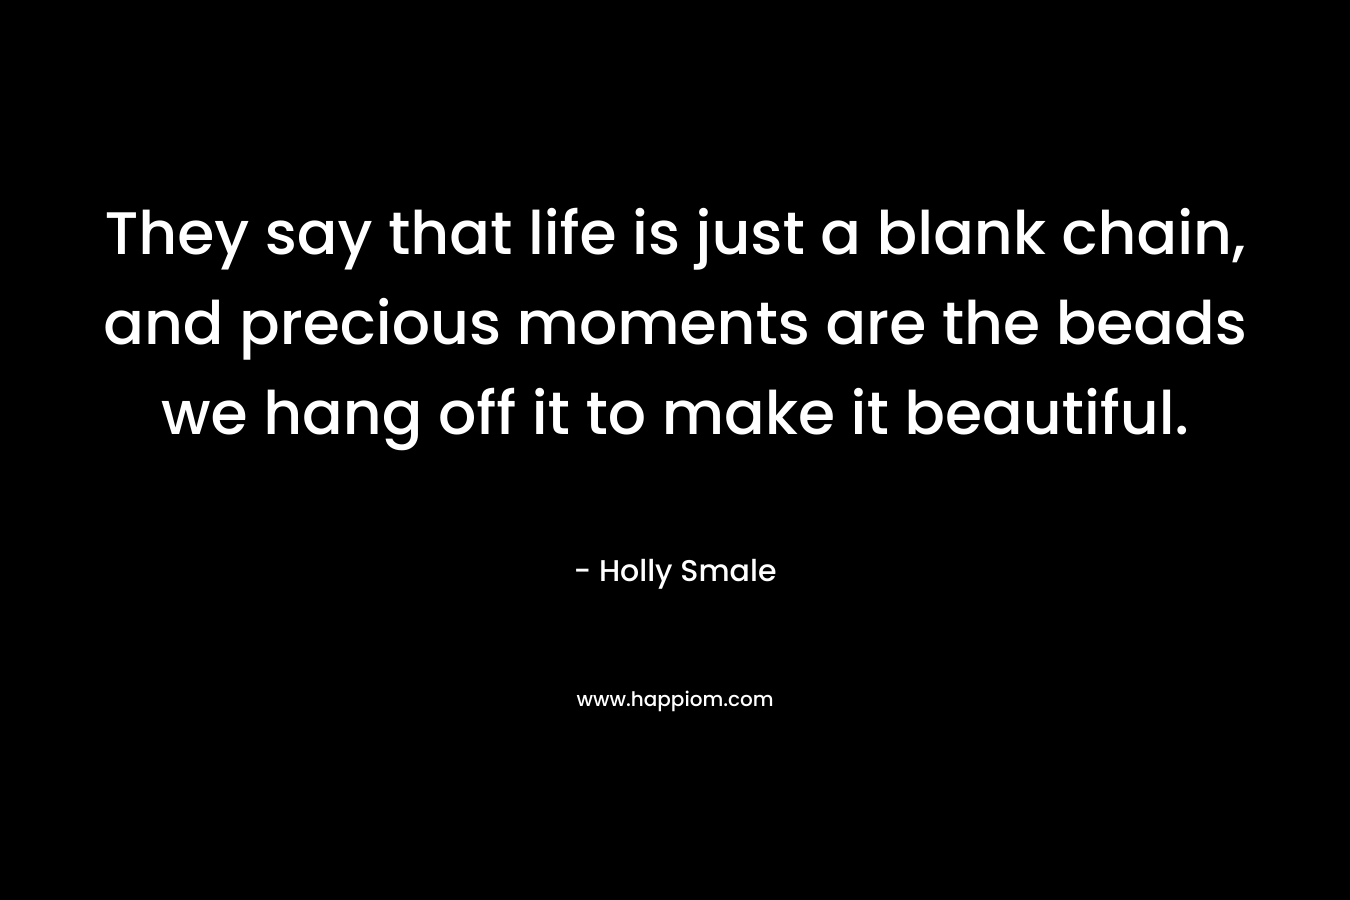 They say that life is just a blank chain, and precious moments are the beads we hang off it to make it beautiful. – Holly Smale